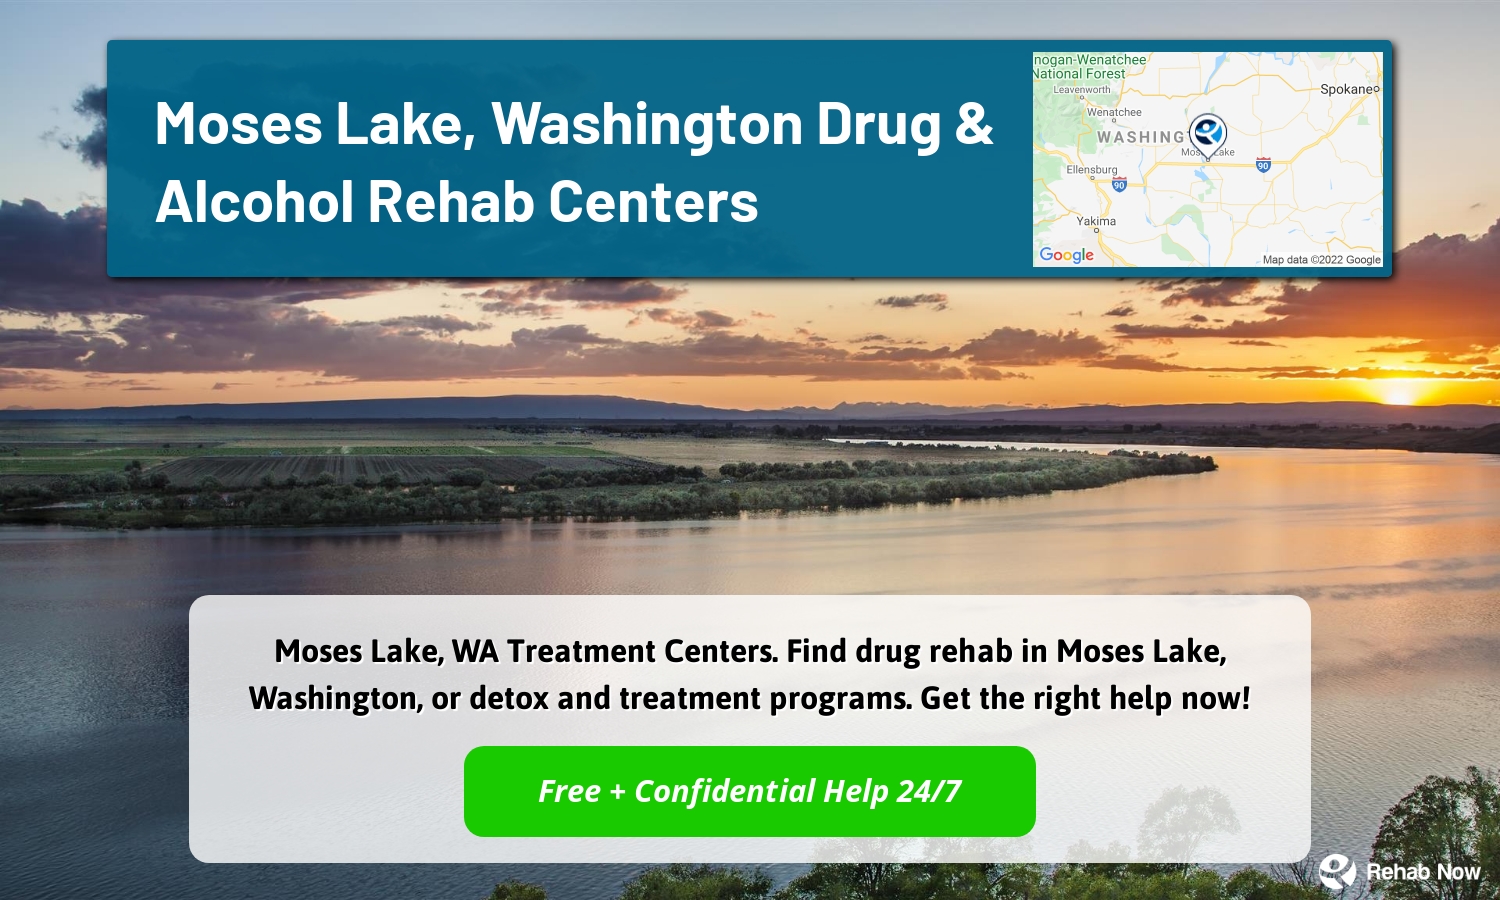 Moses Lake, WA Treatment Centers. Find drug rehab in Moses Lake, Washington, or detox and treatment programs. Get the right help now!